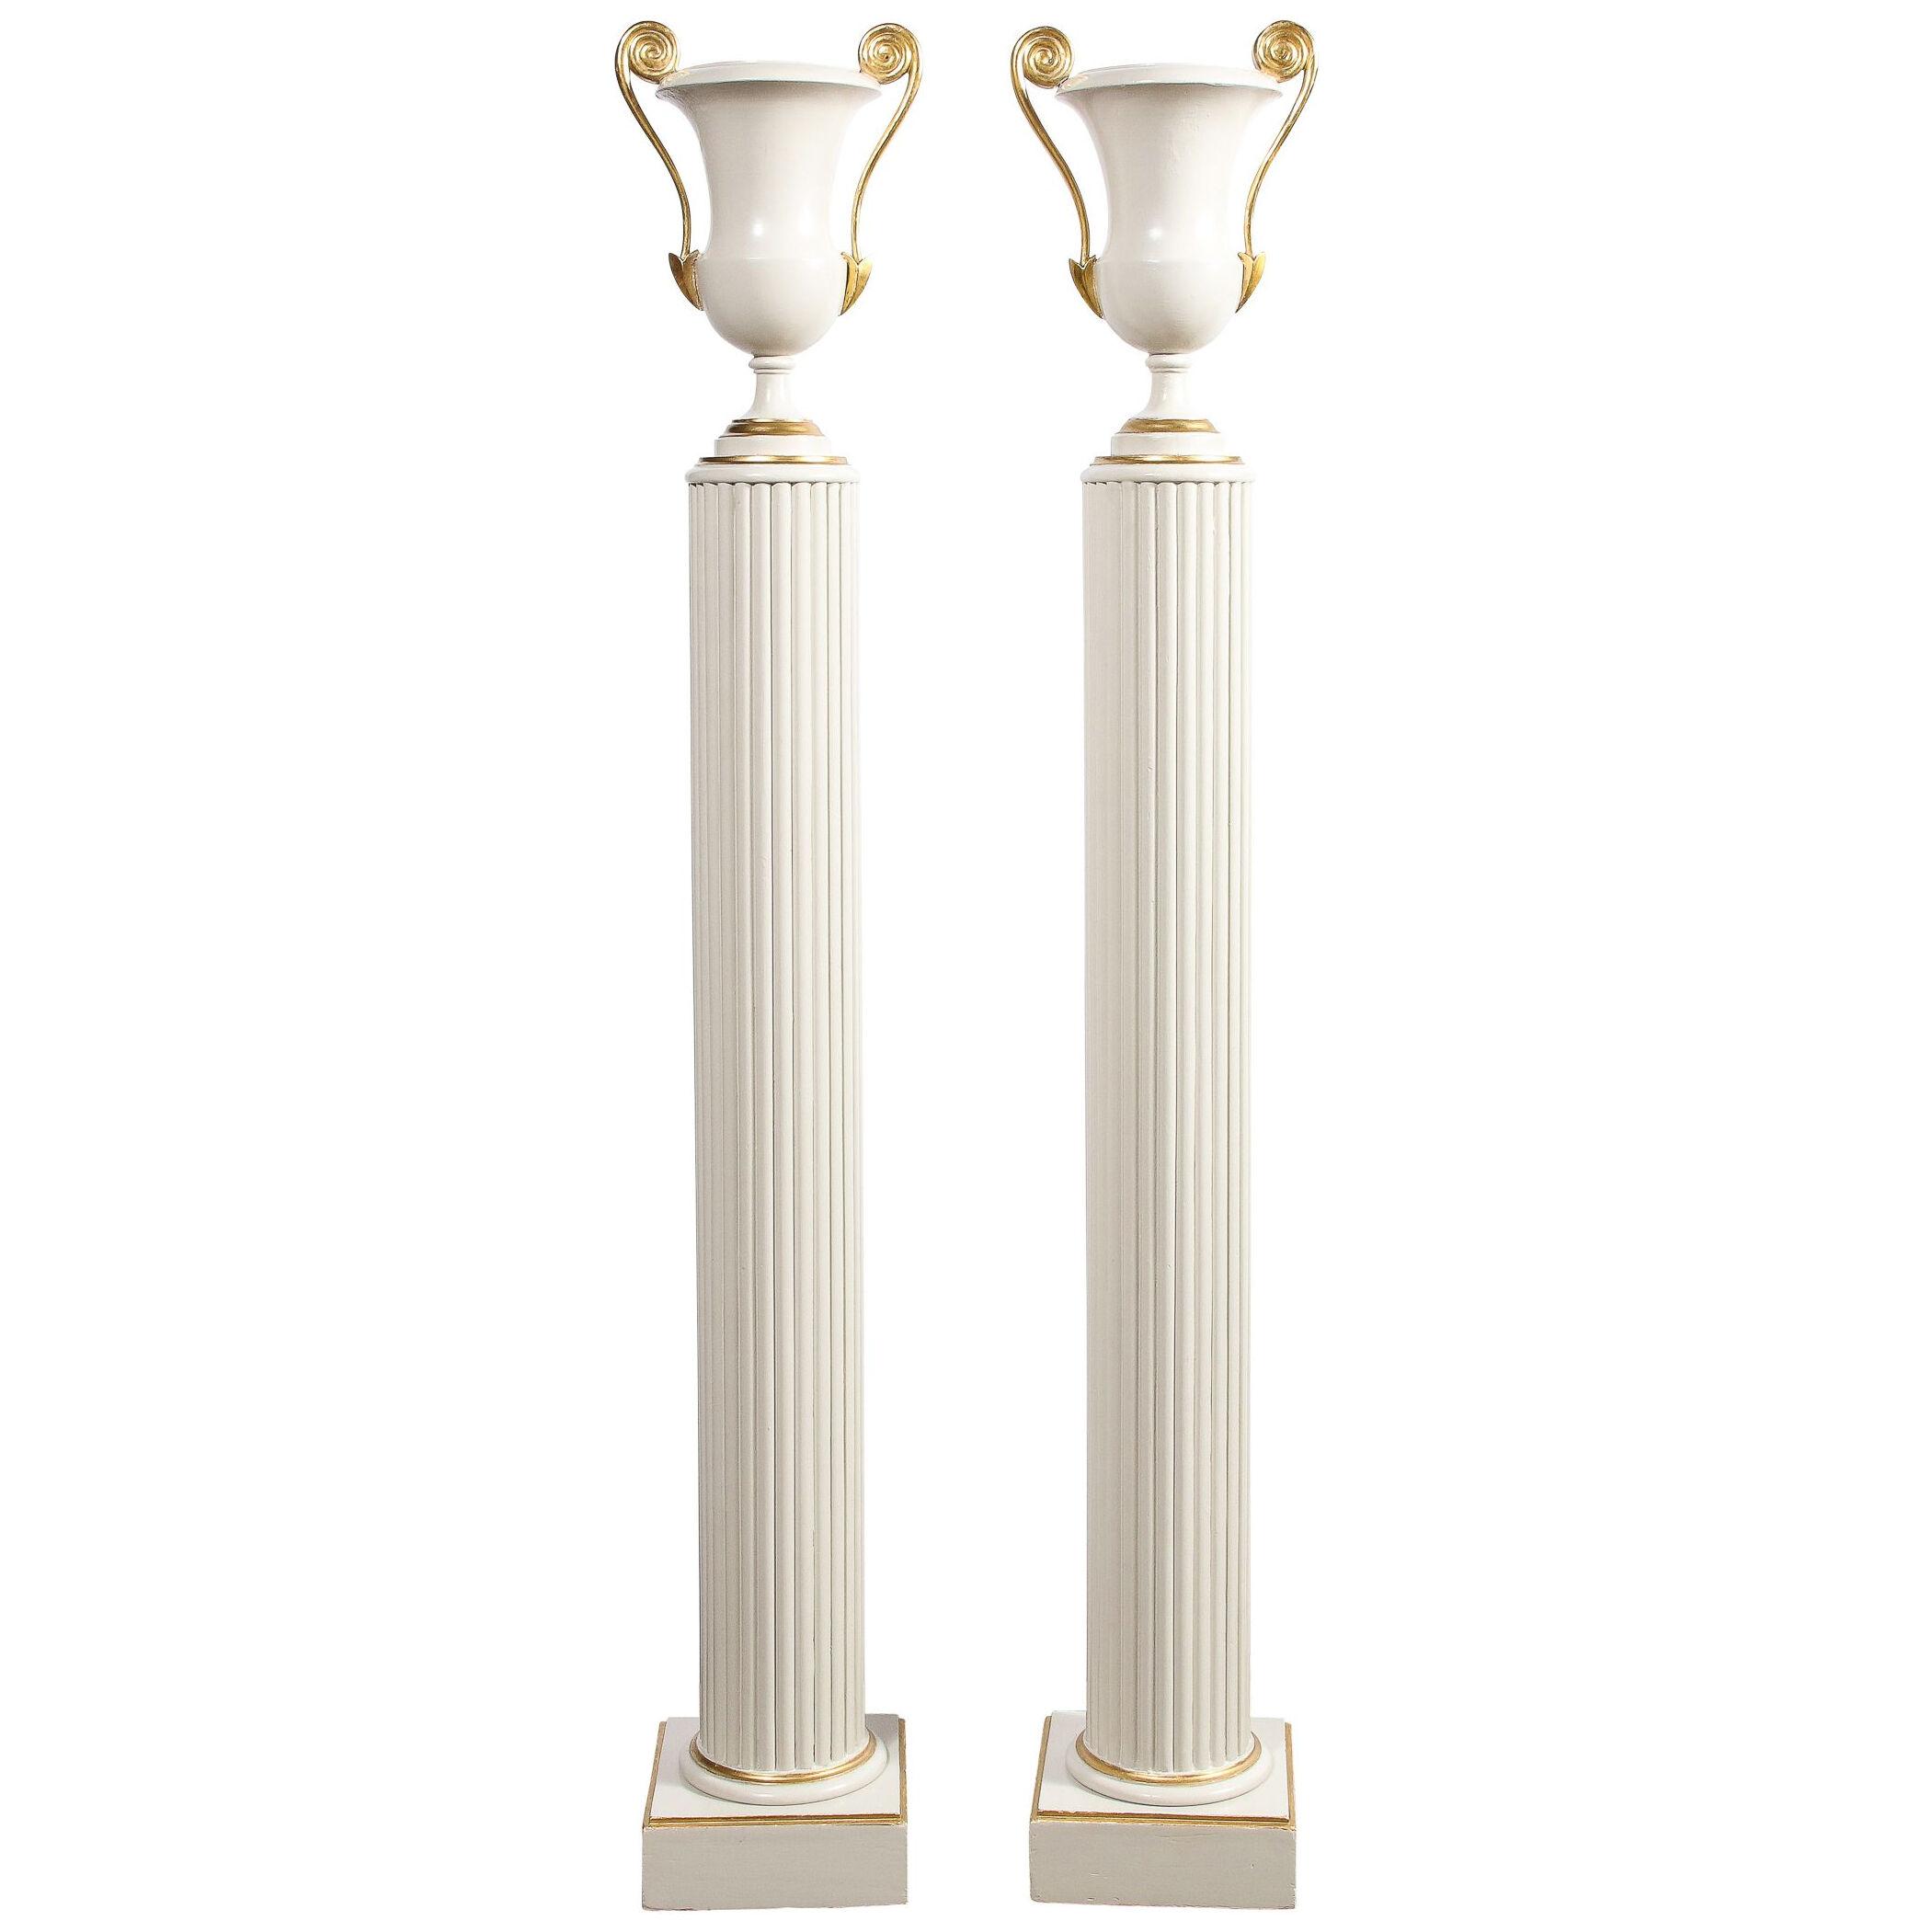 Pair of Neoclassical Urn Form Up-lights on Fluted Pedestals with Gilt Detailing